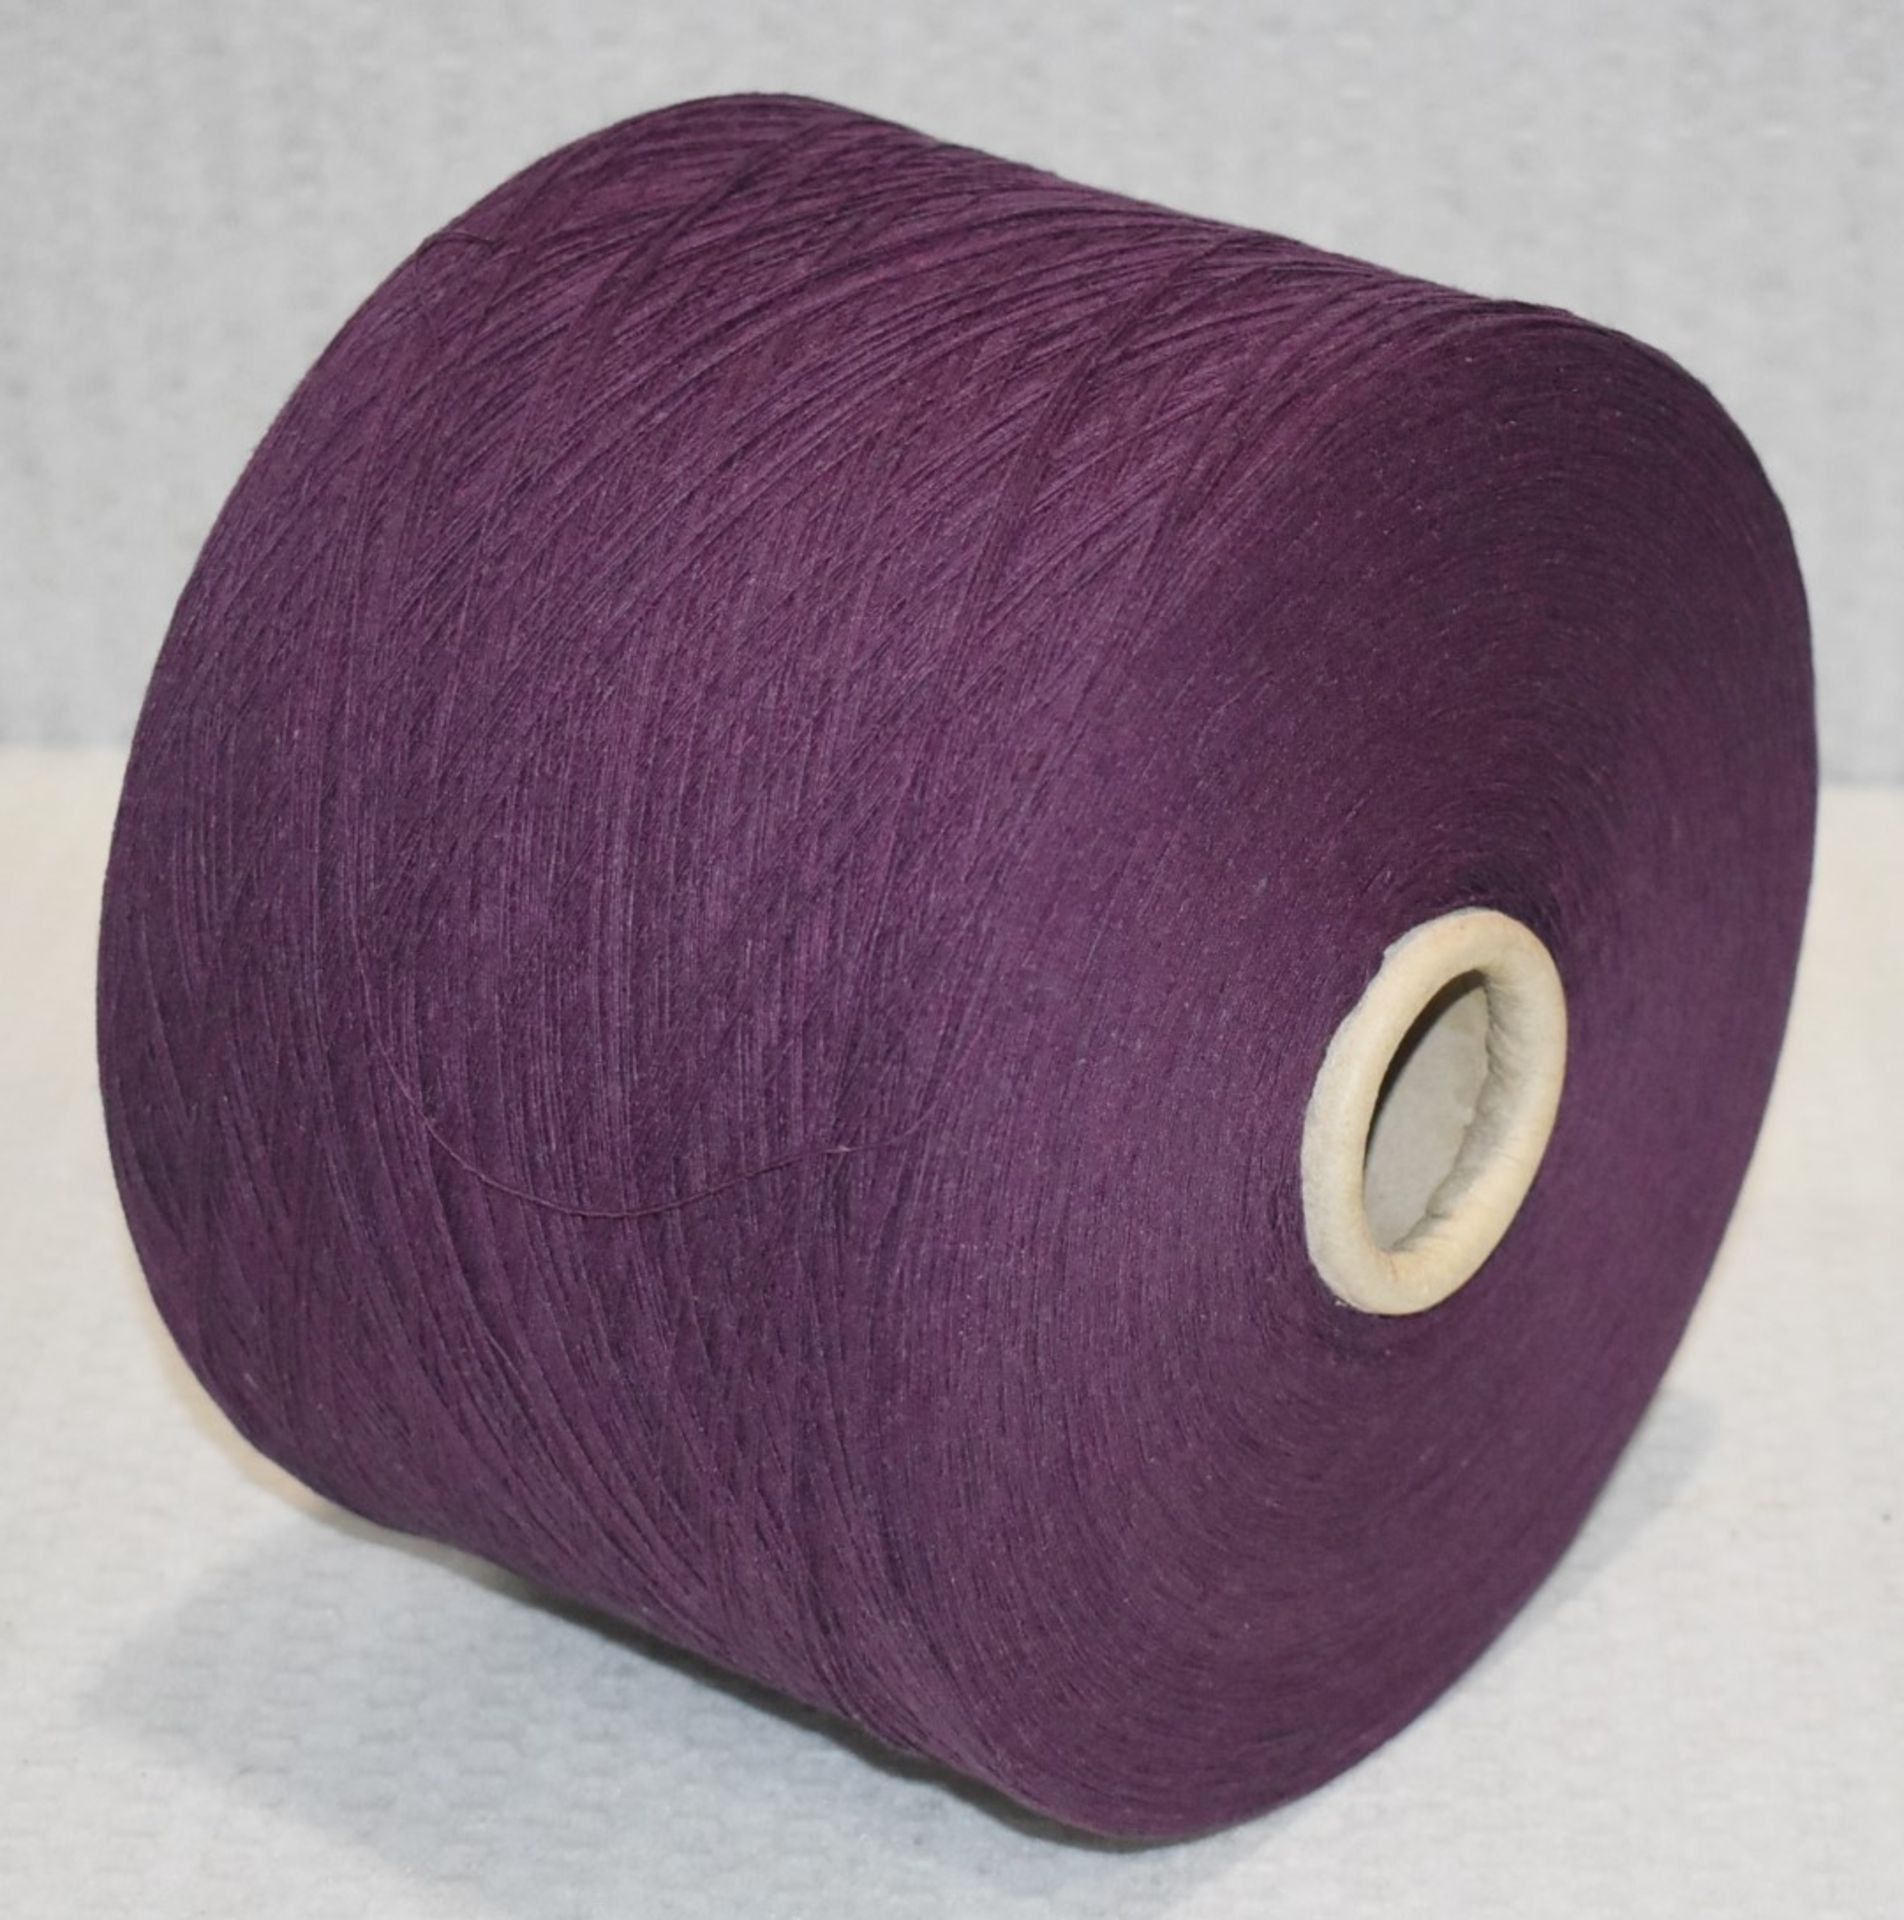 1 x Cone of 1/13 MicroCotton Knitting Yarn - Purple - Approx Weight: 2,300g - New Stock ABL Yarn - Image 7 of 13